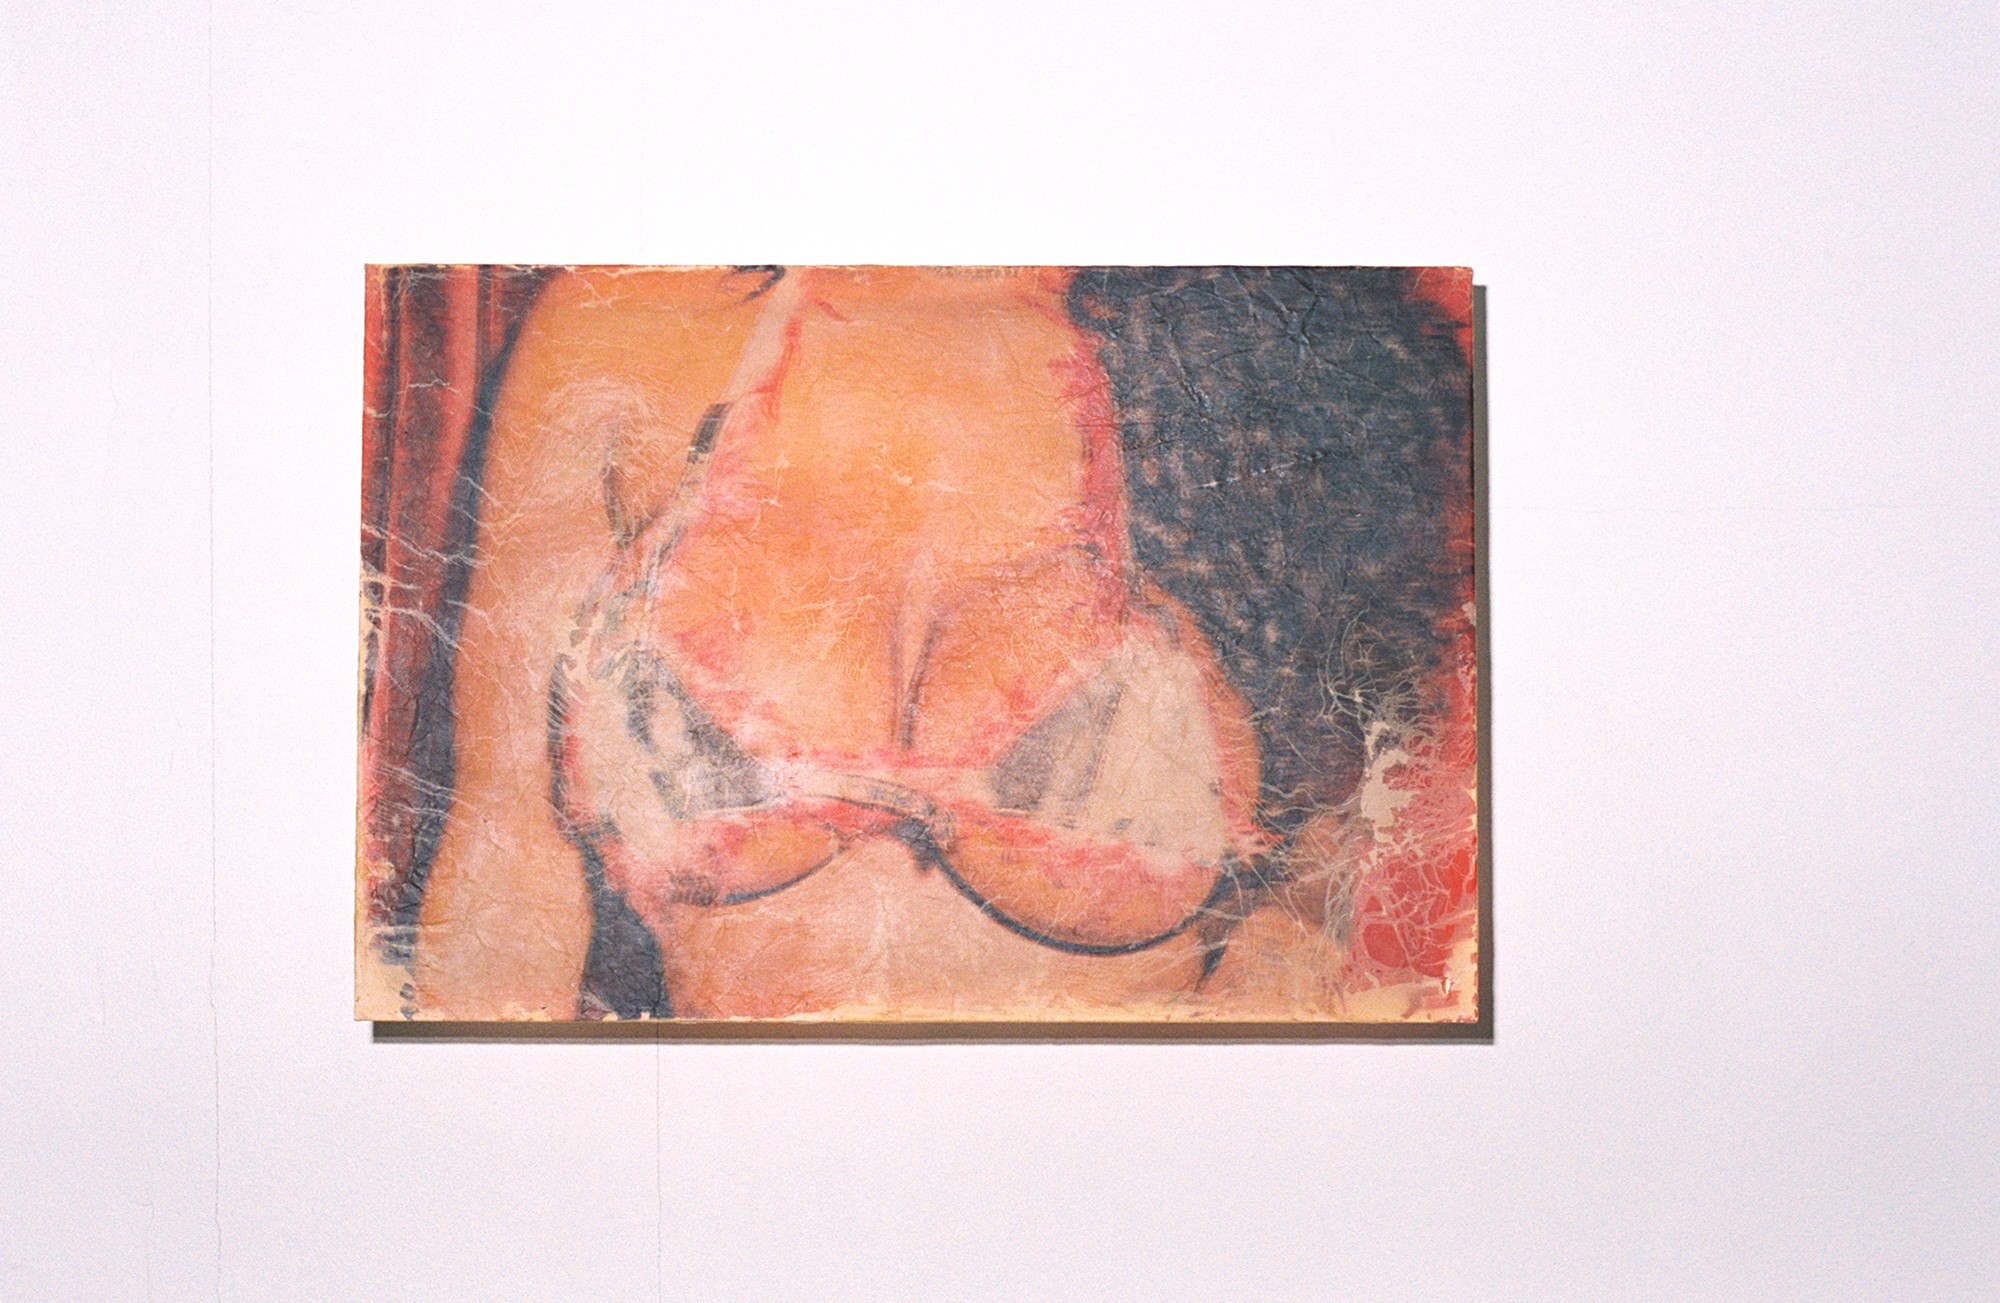 Maya Fuhrs voyeuristic new show is an ode to edging Dazed pic